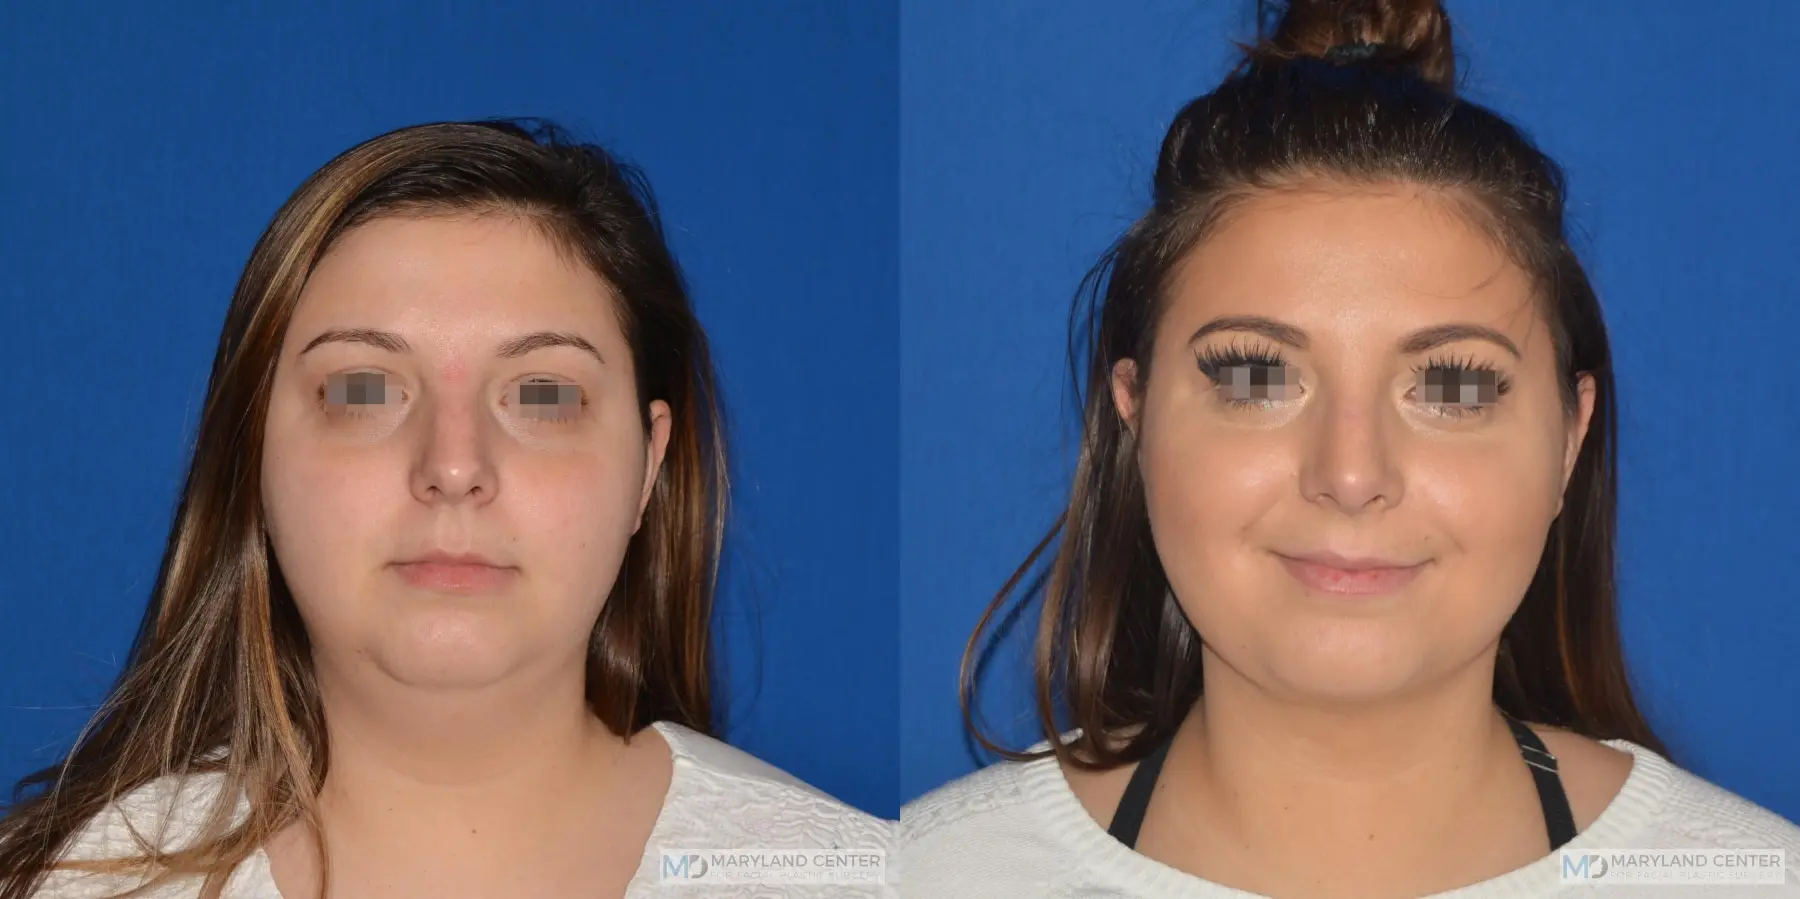 Facial Liposuction: Patient 1 - Before and After  